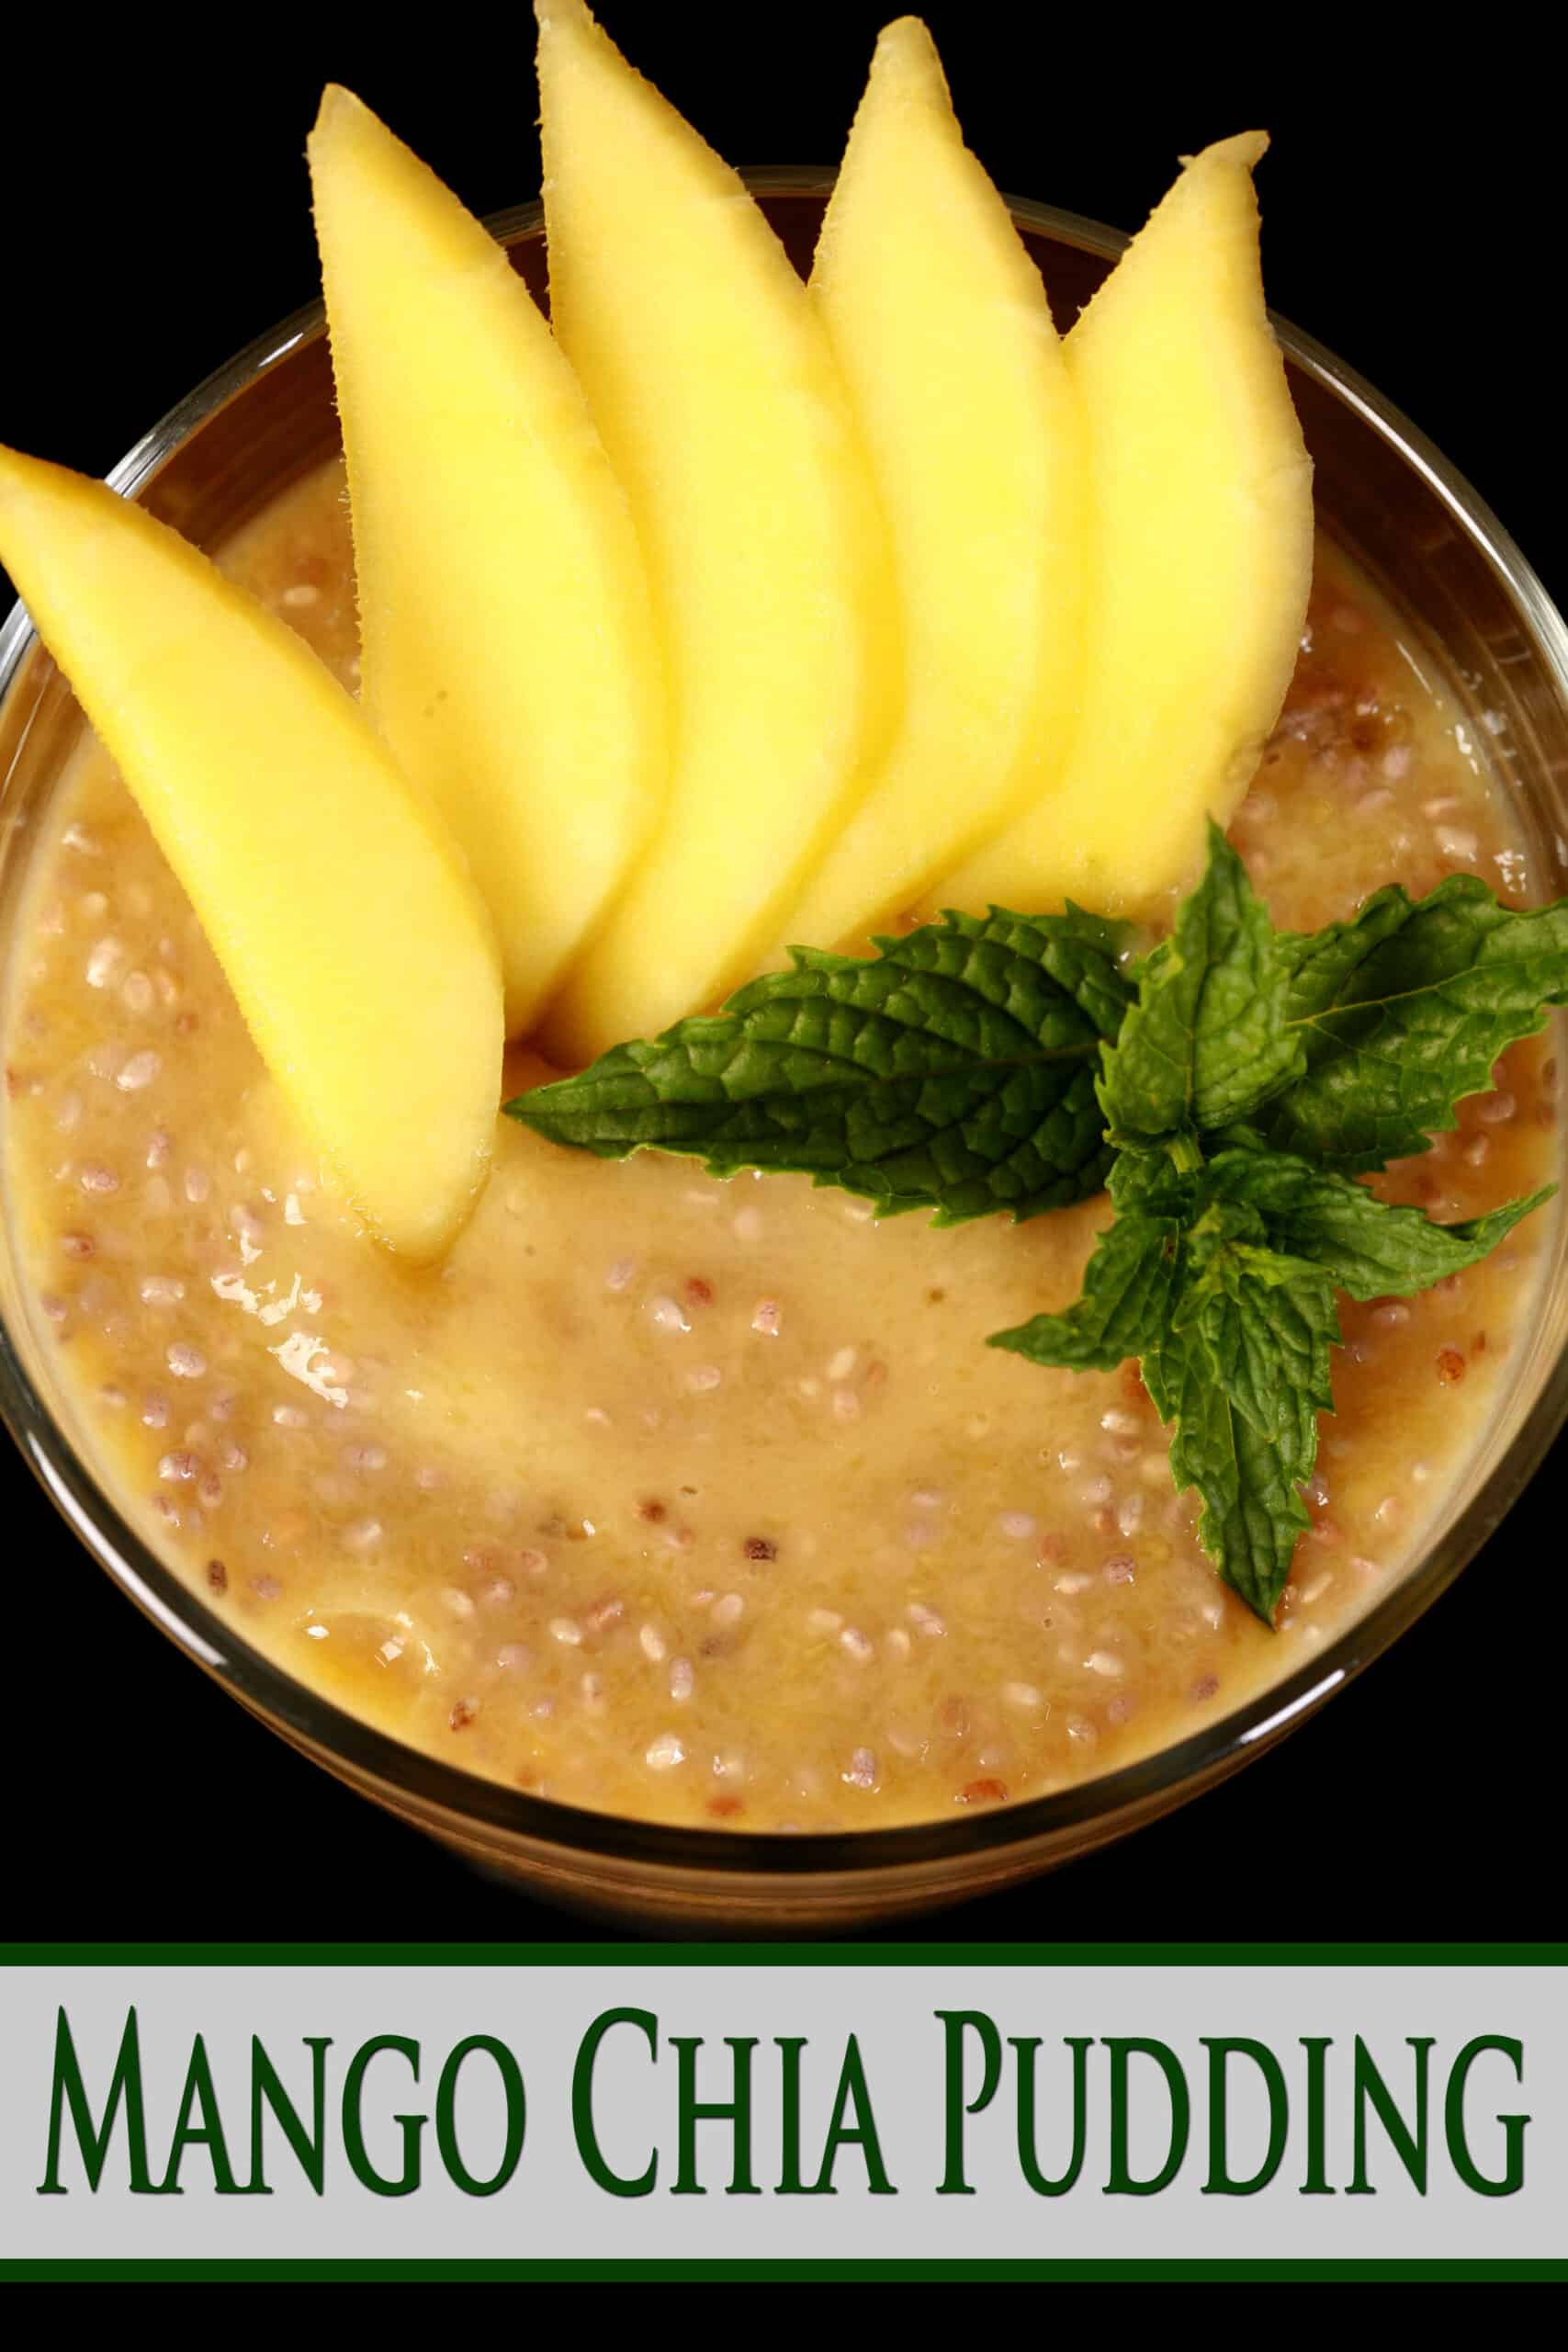 A glass of peach colored chia seed pudding, with sliced mango and fresh mint on top. Overlaid text says mango chia pudding.